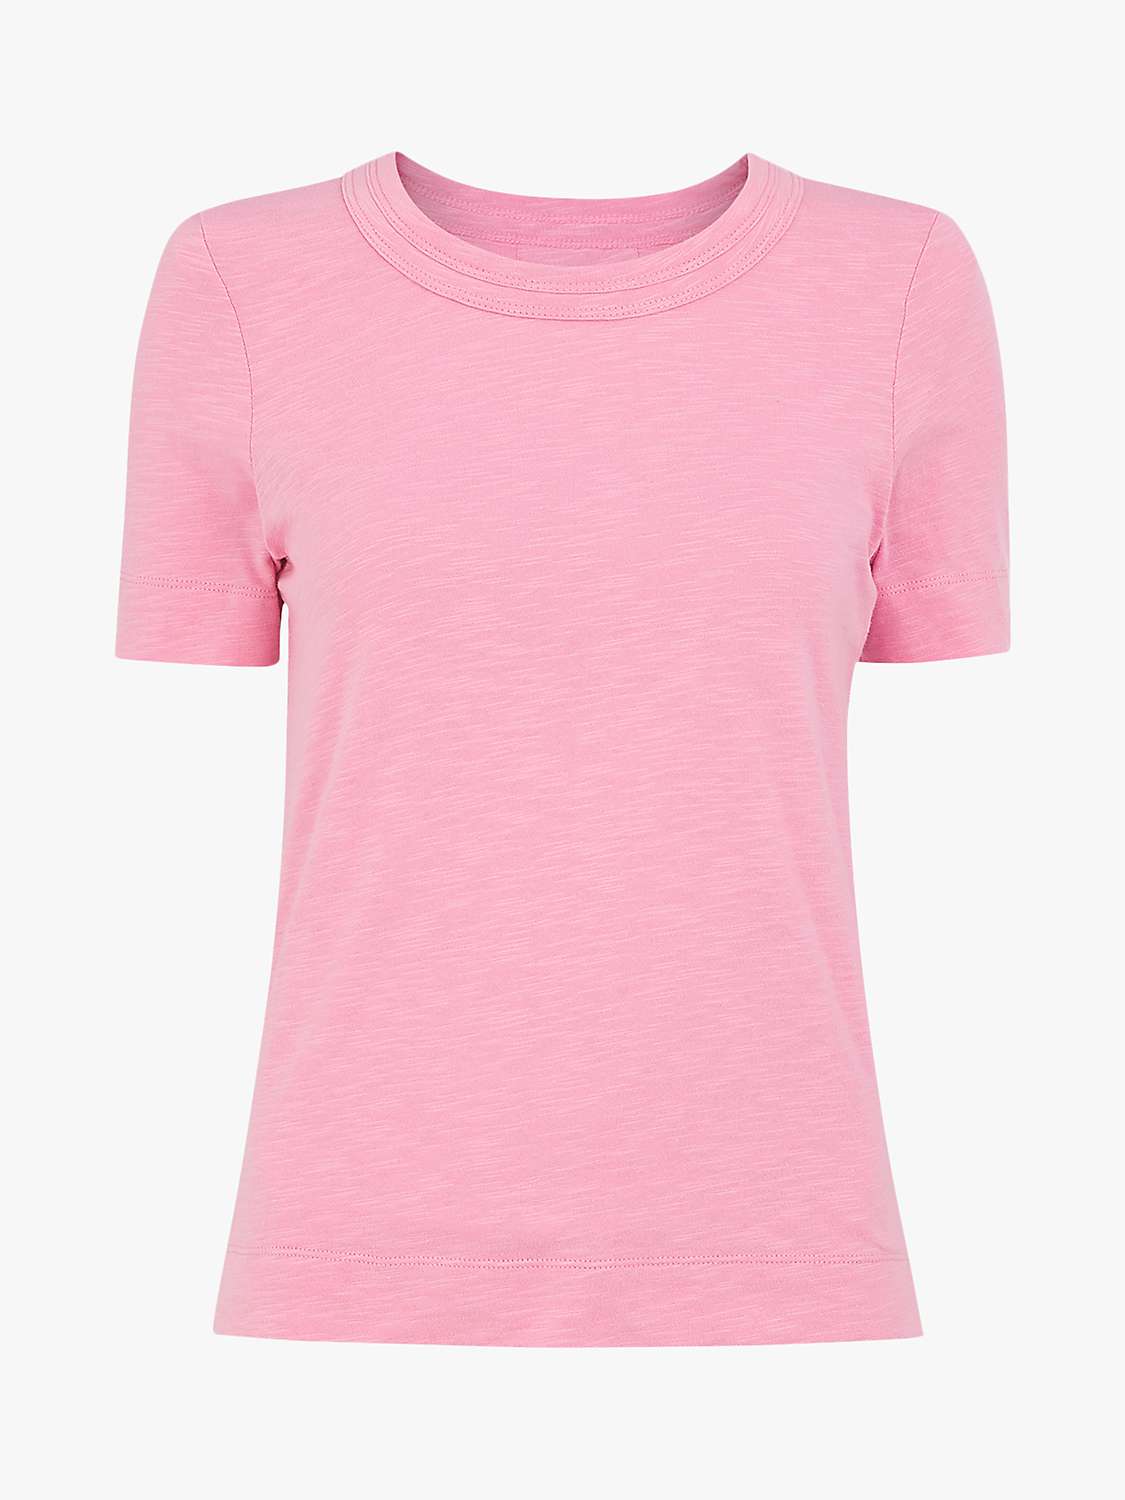 Whistles Rosa Double Trim T-Shirt, Pink at John Lewis & Partners